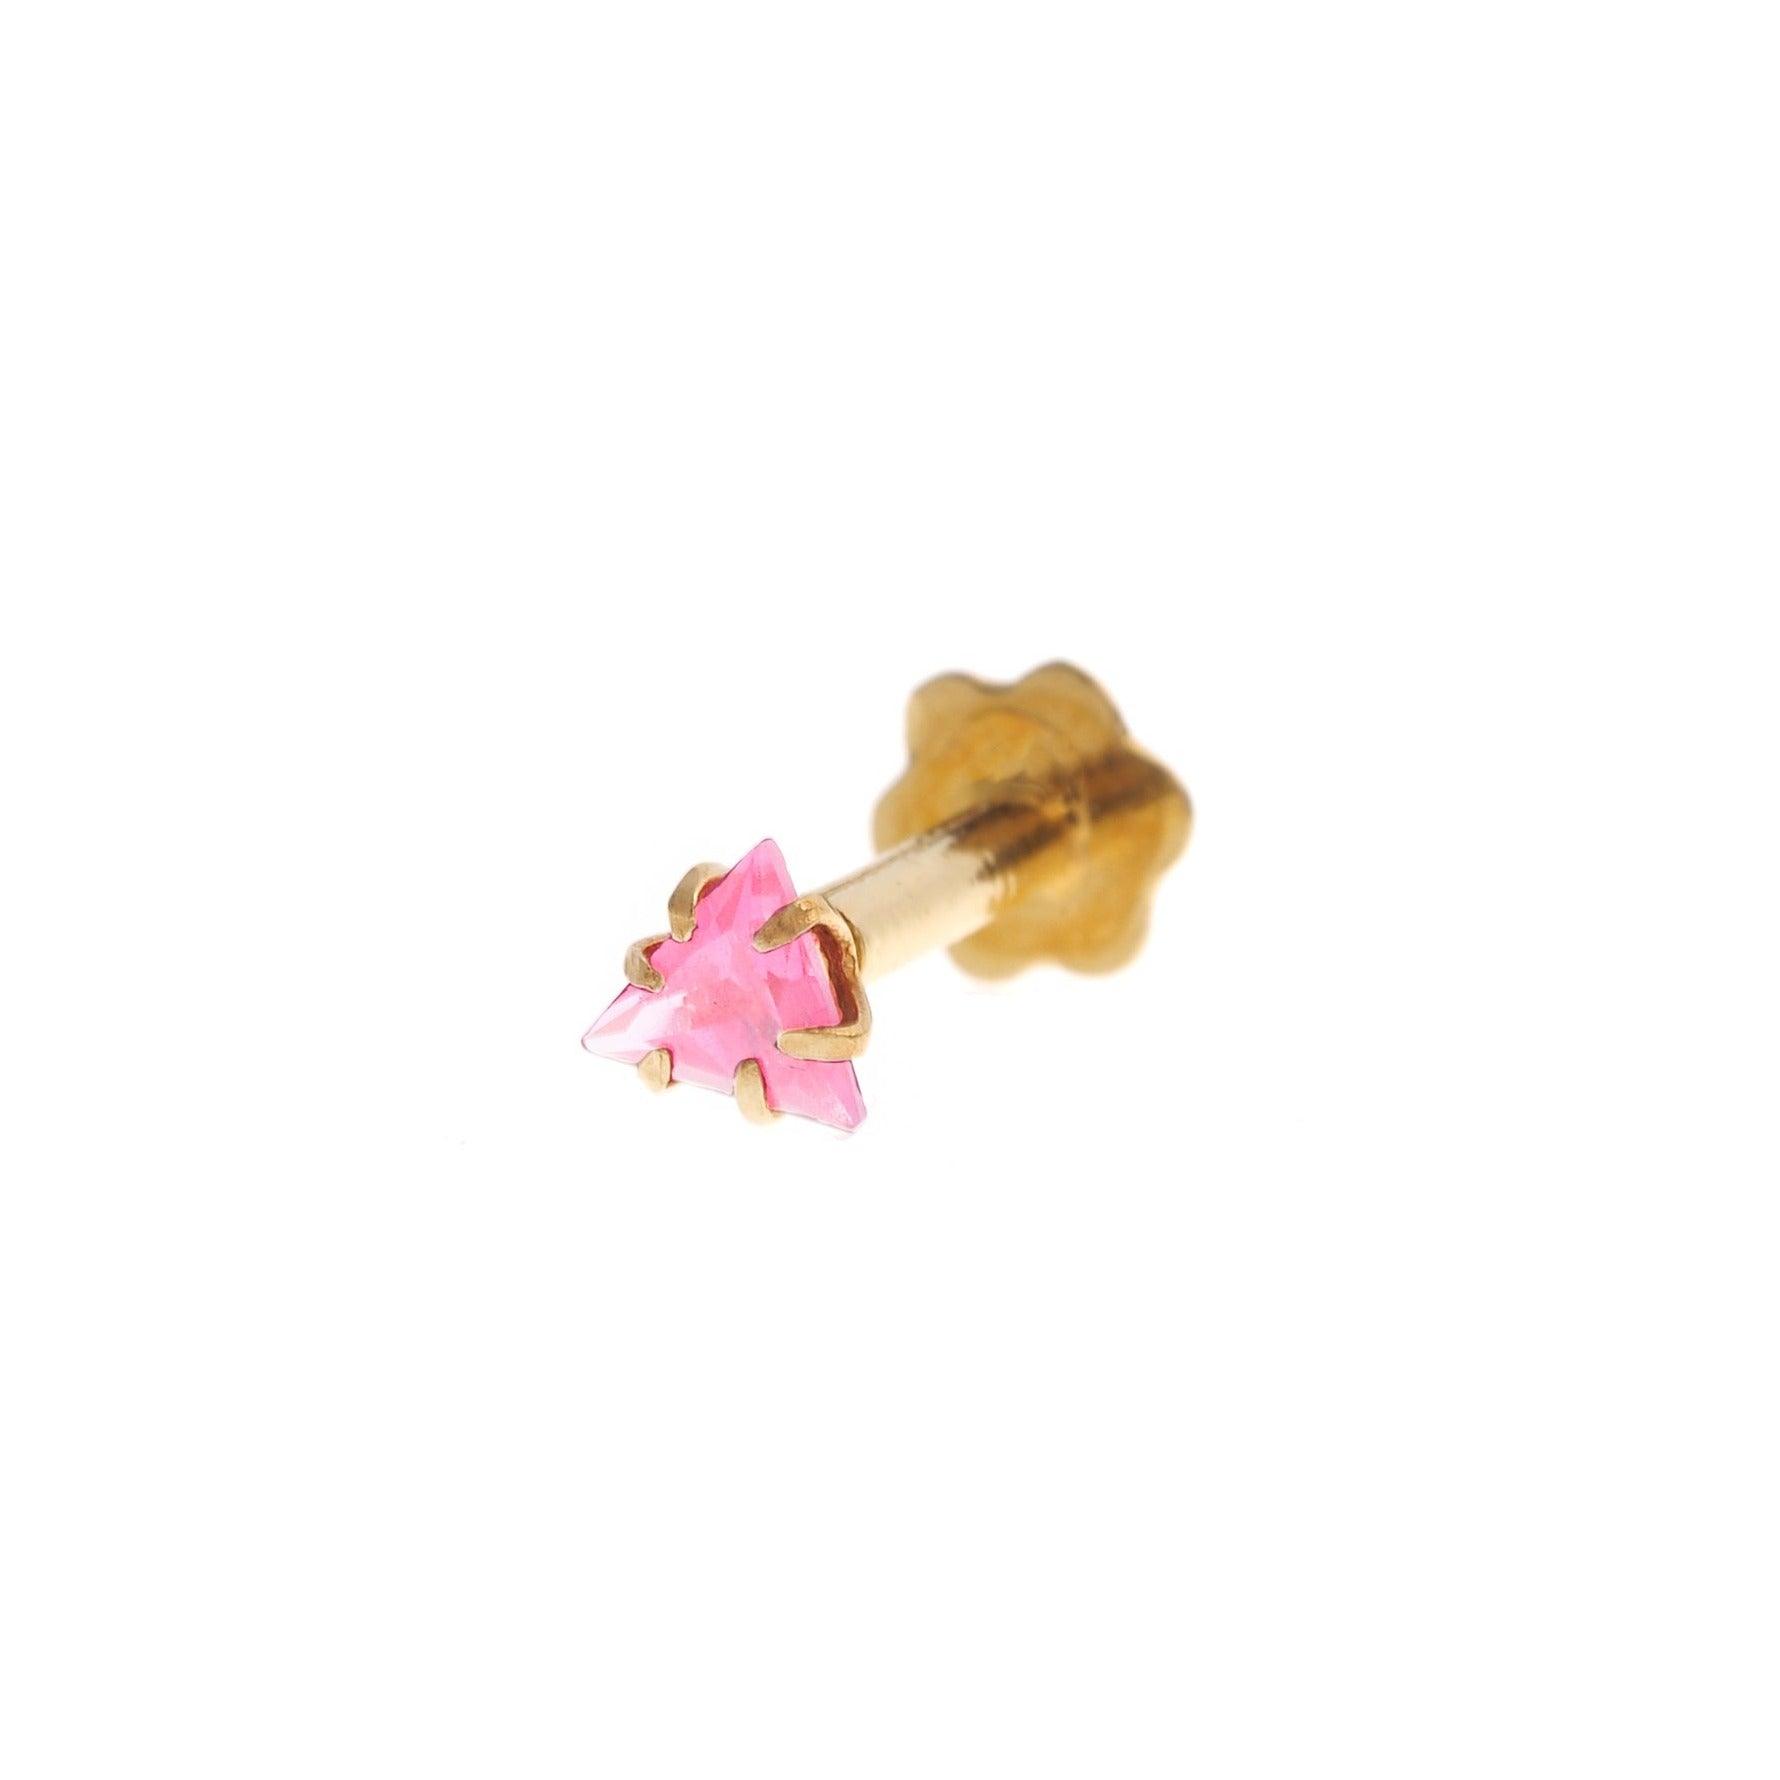 18ct Gold Nose Stud with a Pink Triangle Cubic Zirconia Stone NS-5803 - Minar Jewellers